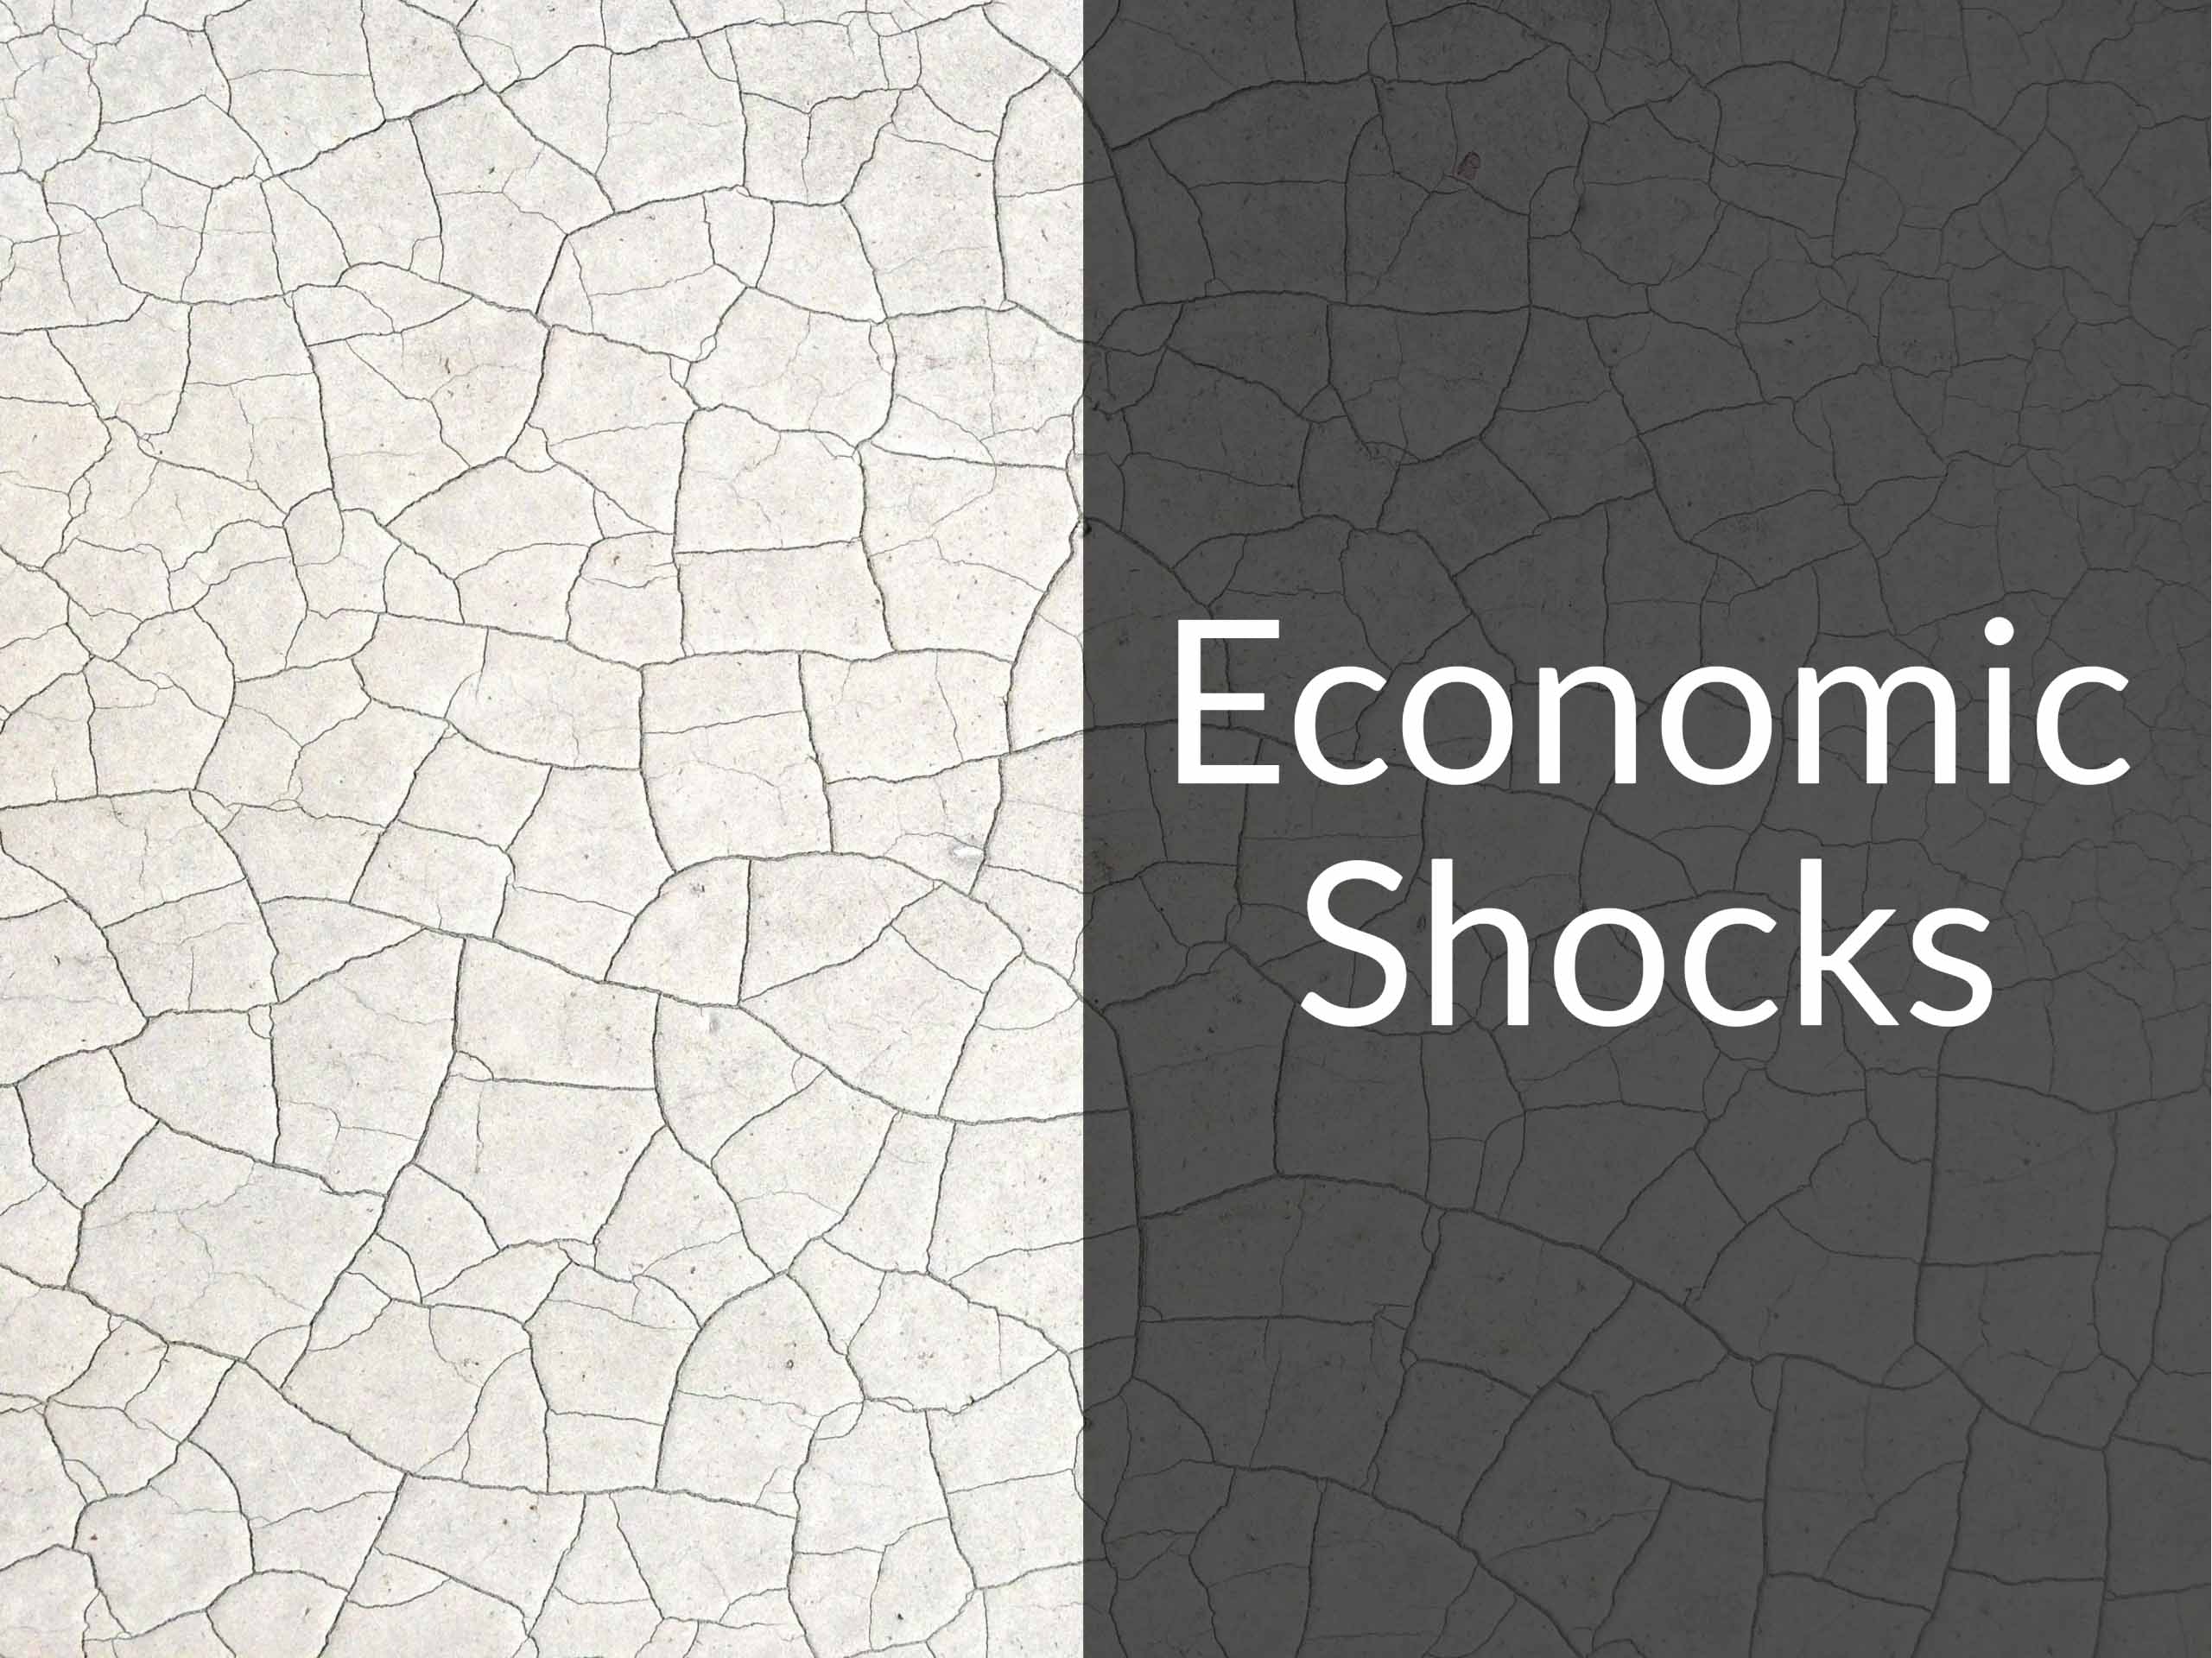 Cracked wall with the caption "Economic Shocks"